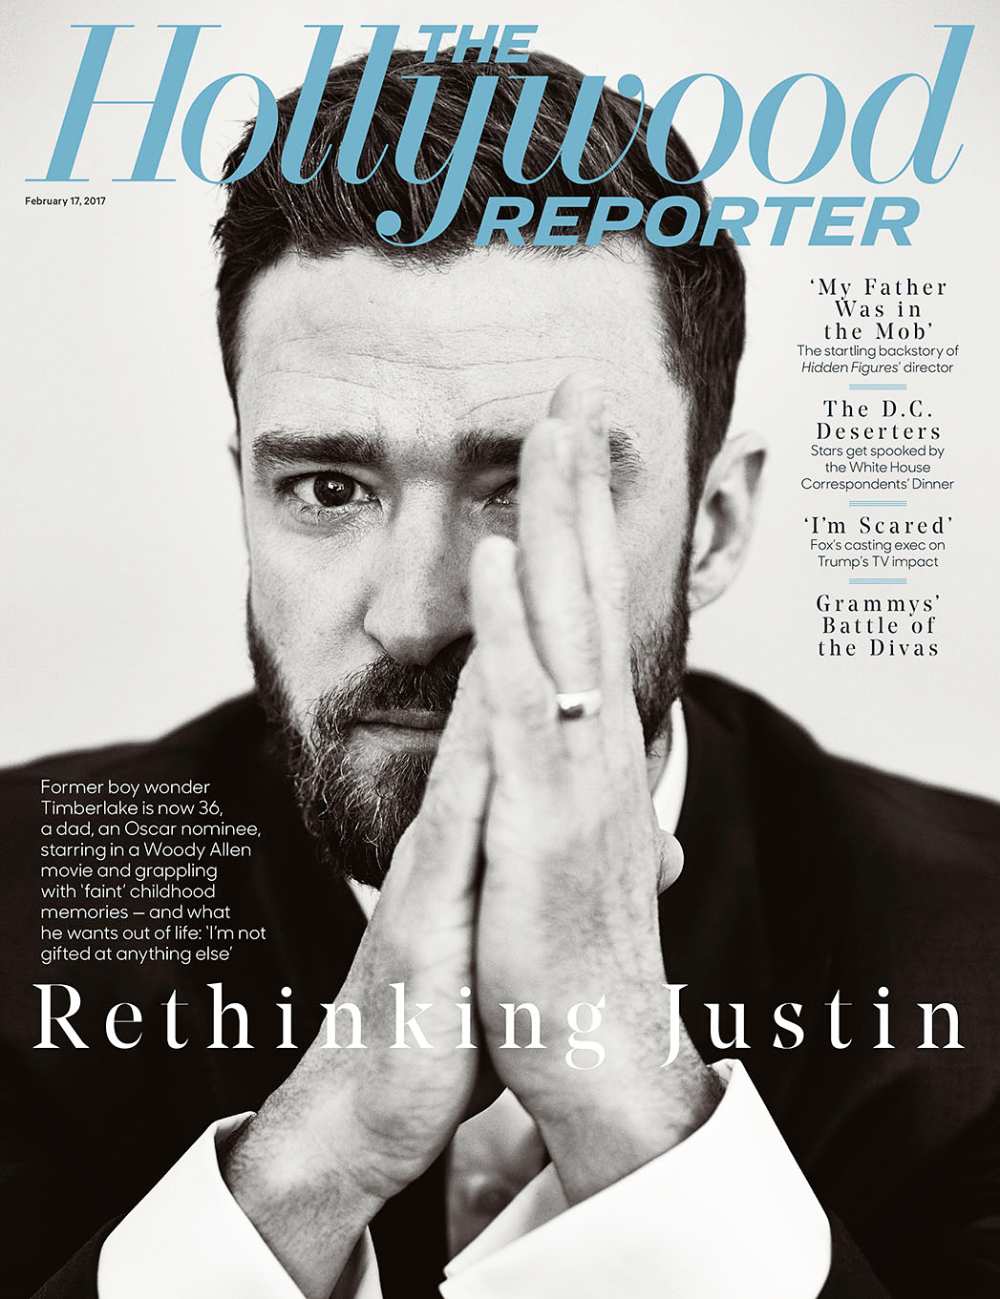 Justin Timberlake The Hollywood Reporter cover